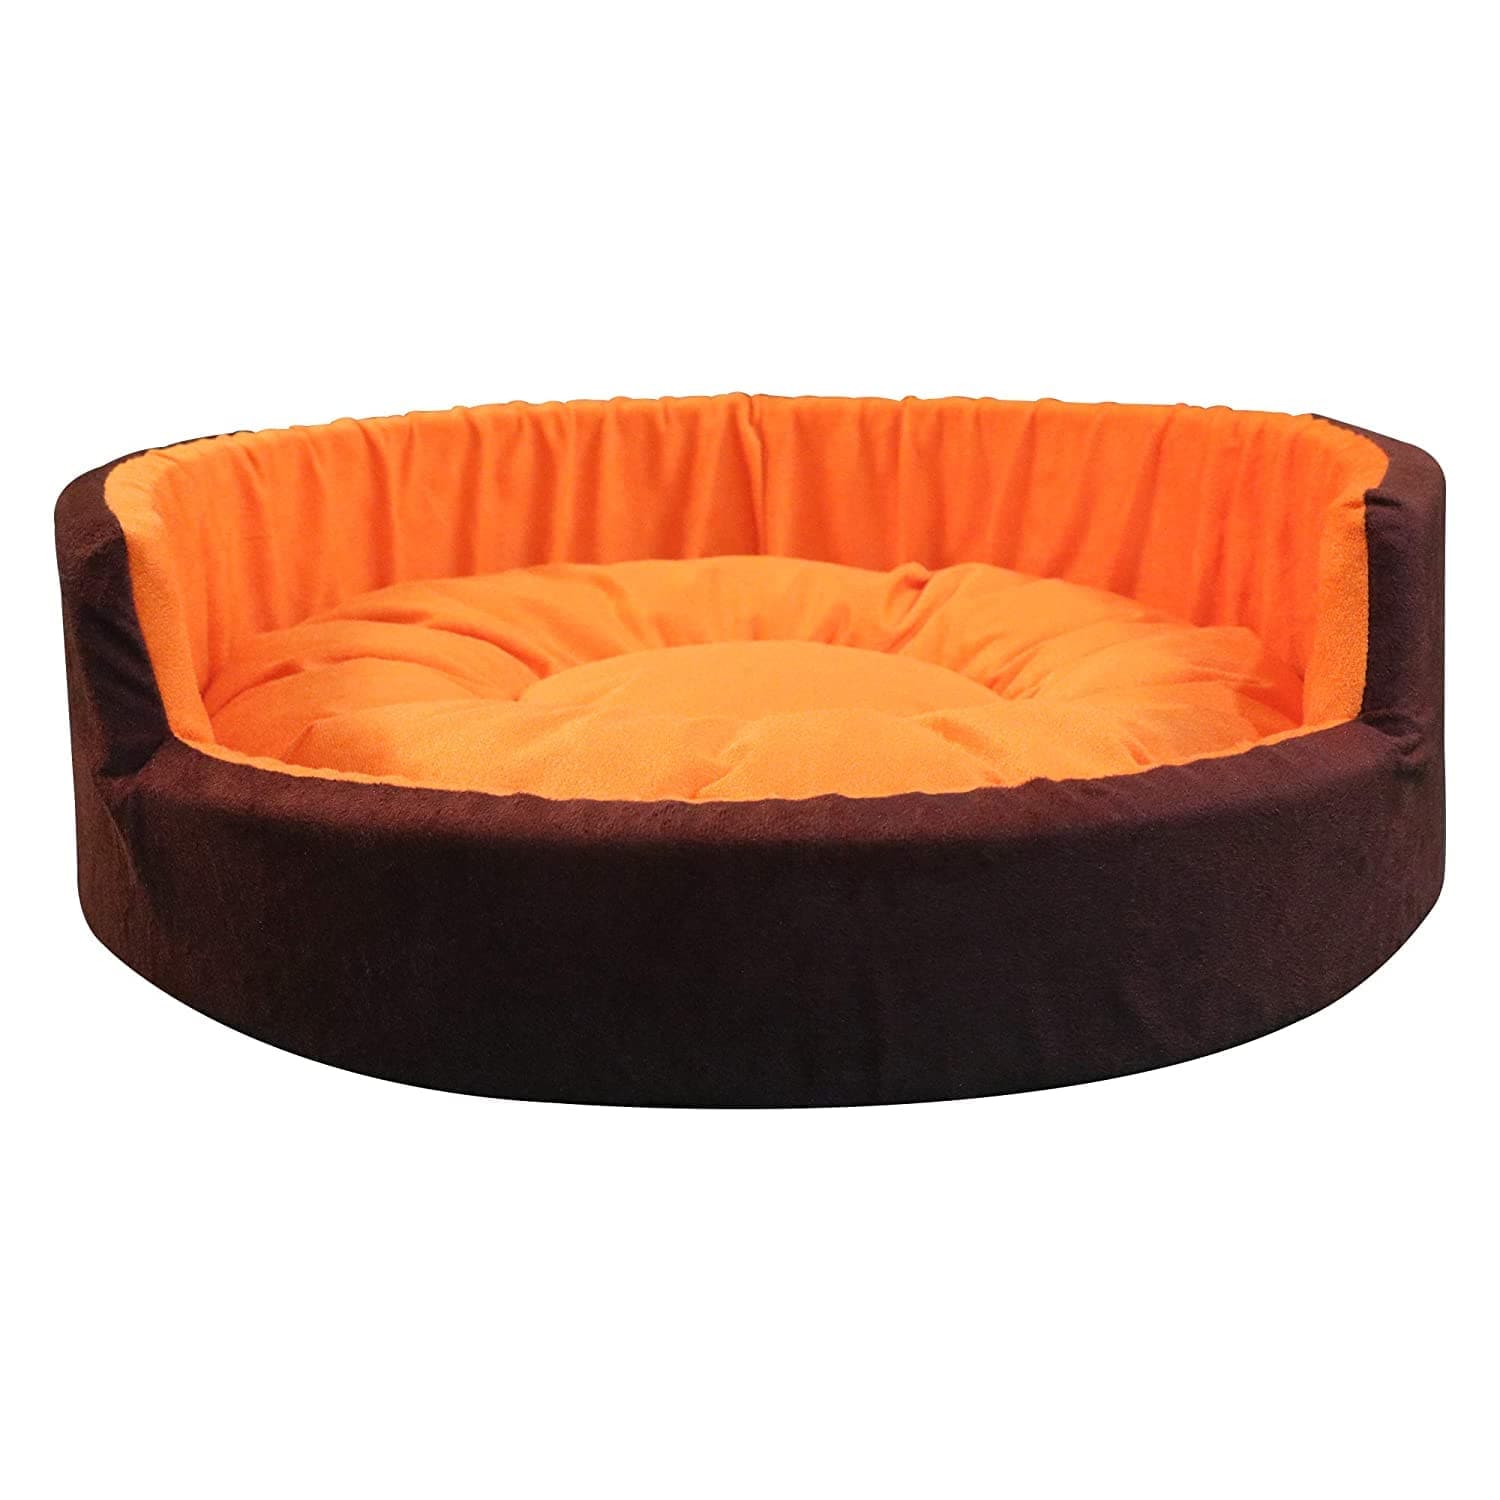 Hiputee Luxurious Round Velvet Dual Colour Bed for Dogs and Cats (Orange & Brown)